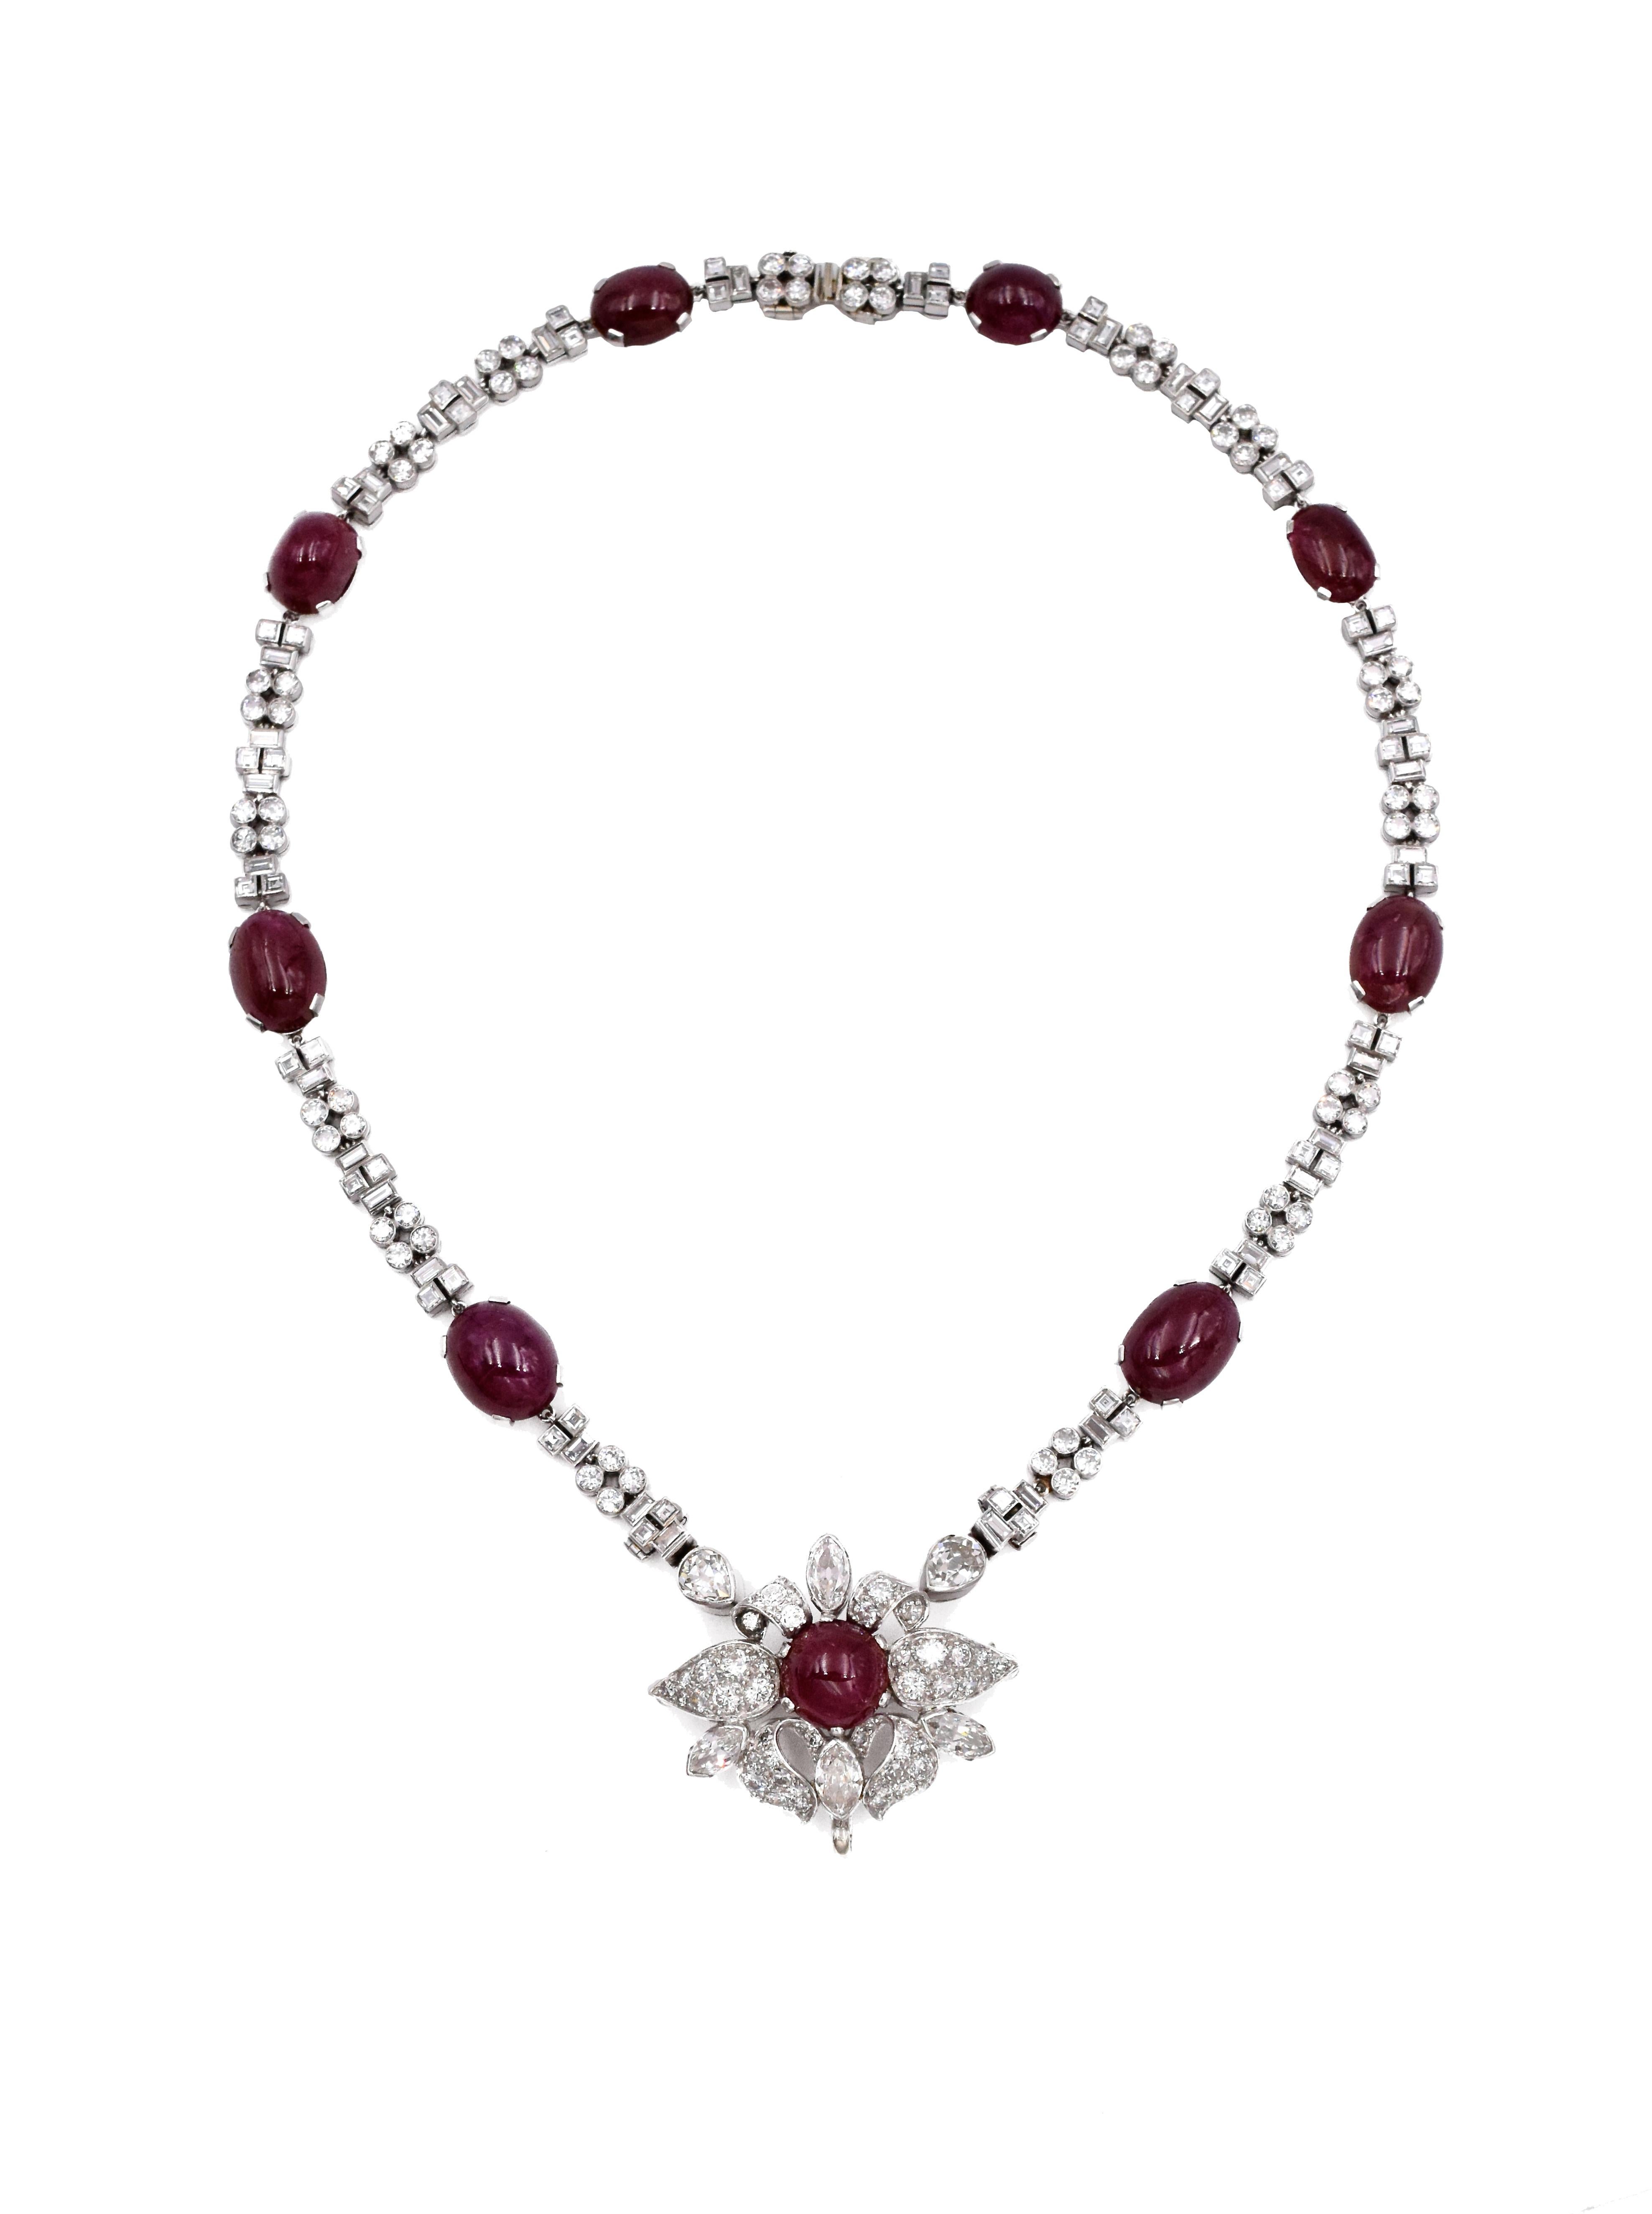 1940s French Set of Diamond and Burma No Heat Ruby Necklace and ...